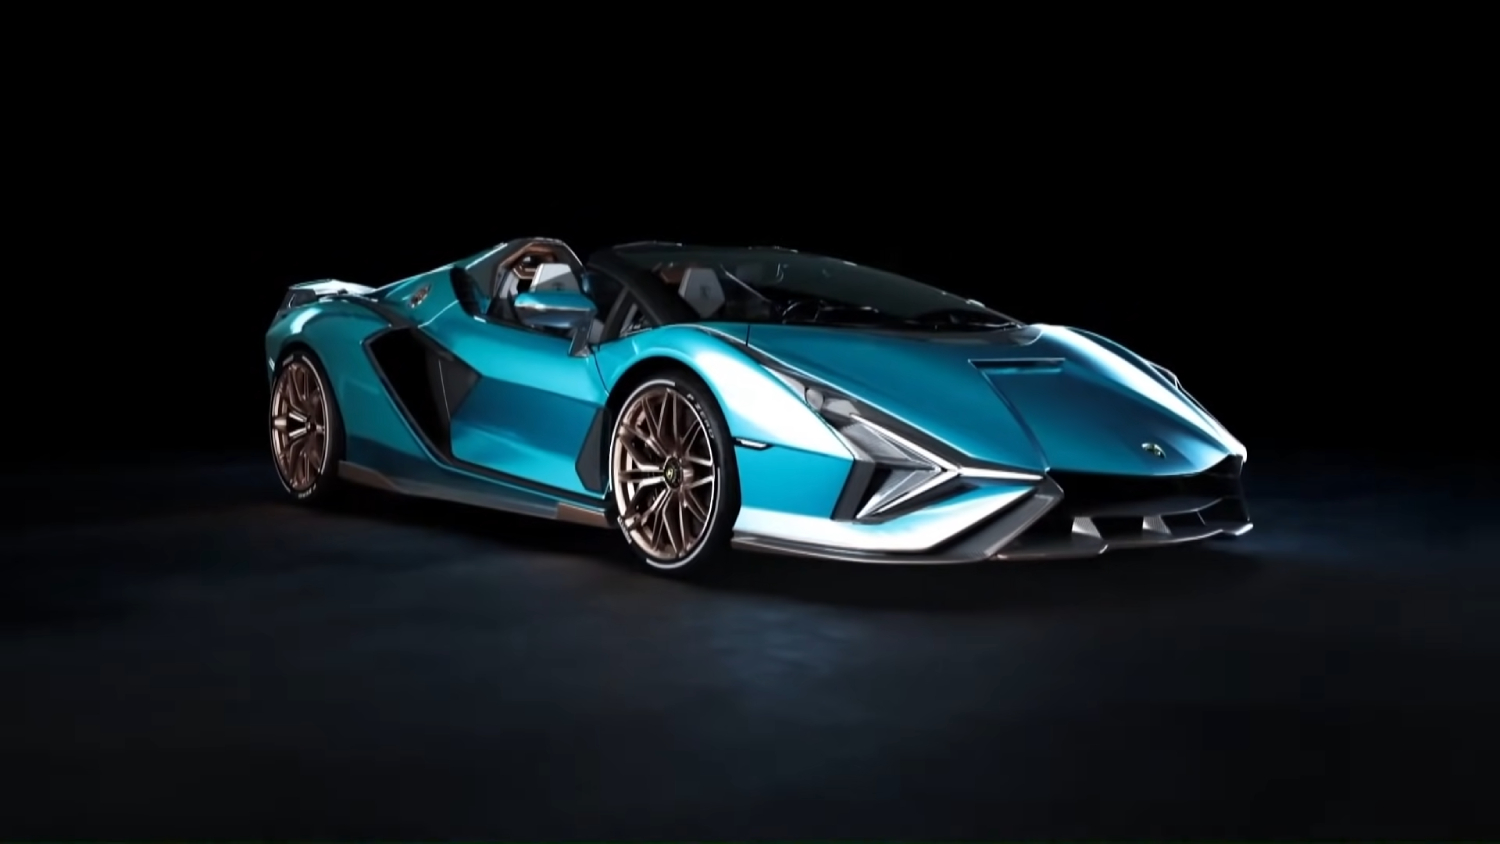 There are four new Lamborghini supercars slated for this year